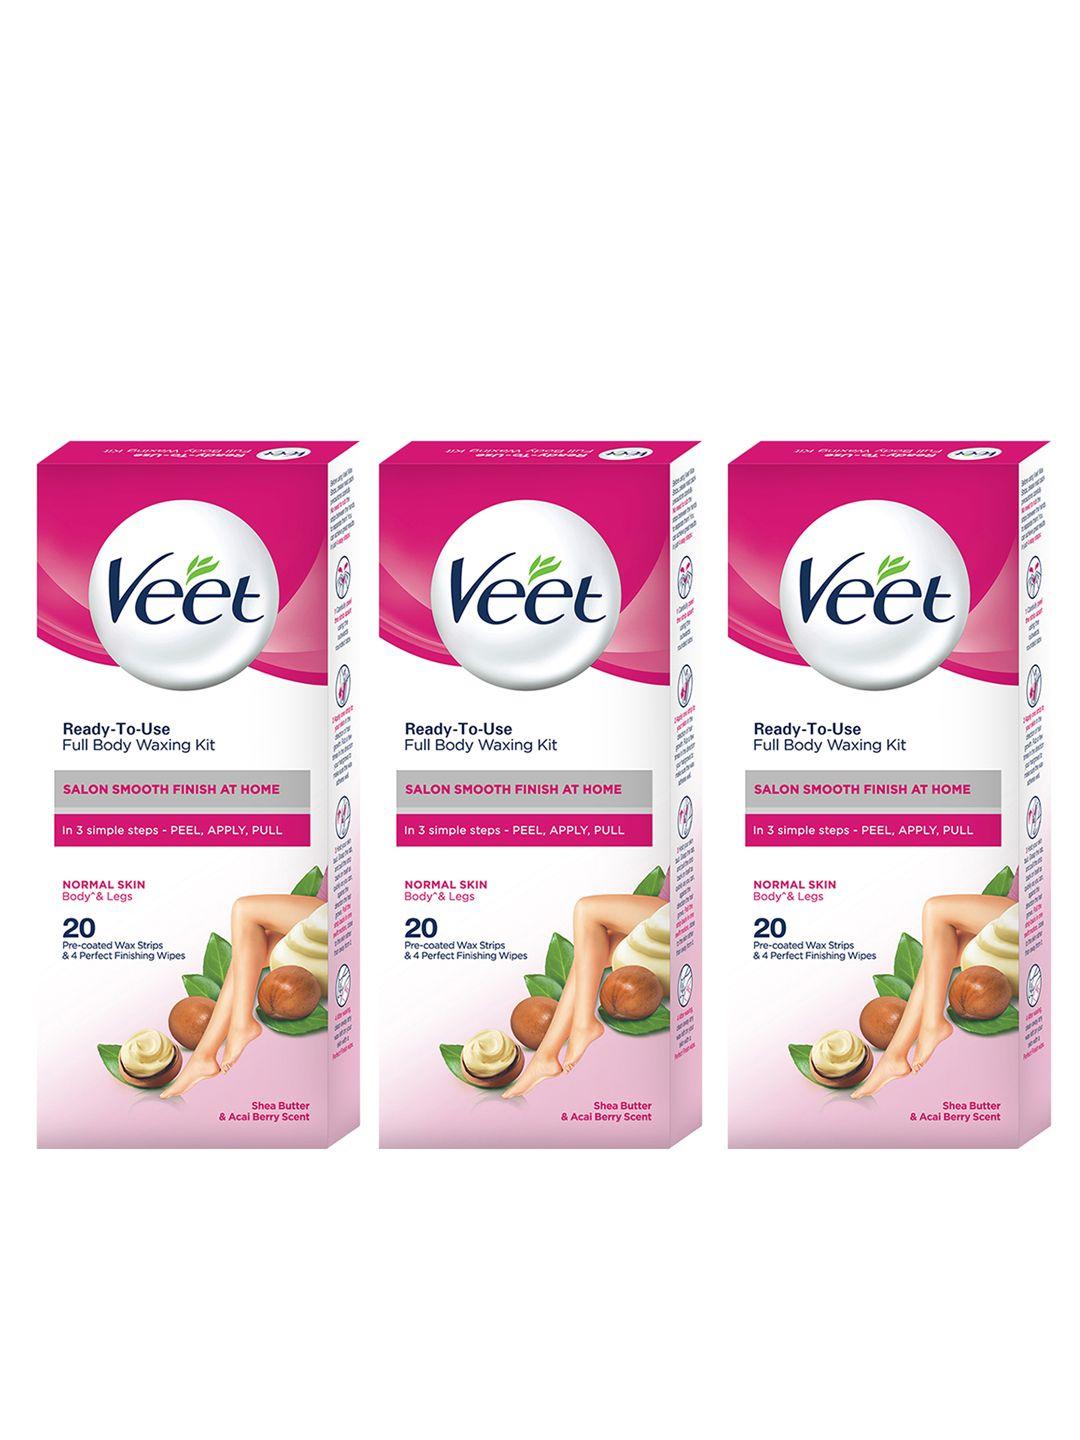 veet set of 3 ready-to-use full body waxing kit for normal skin - 20 strips each